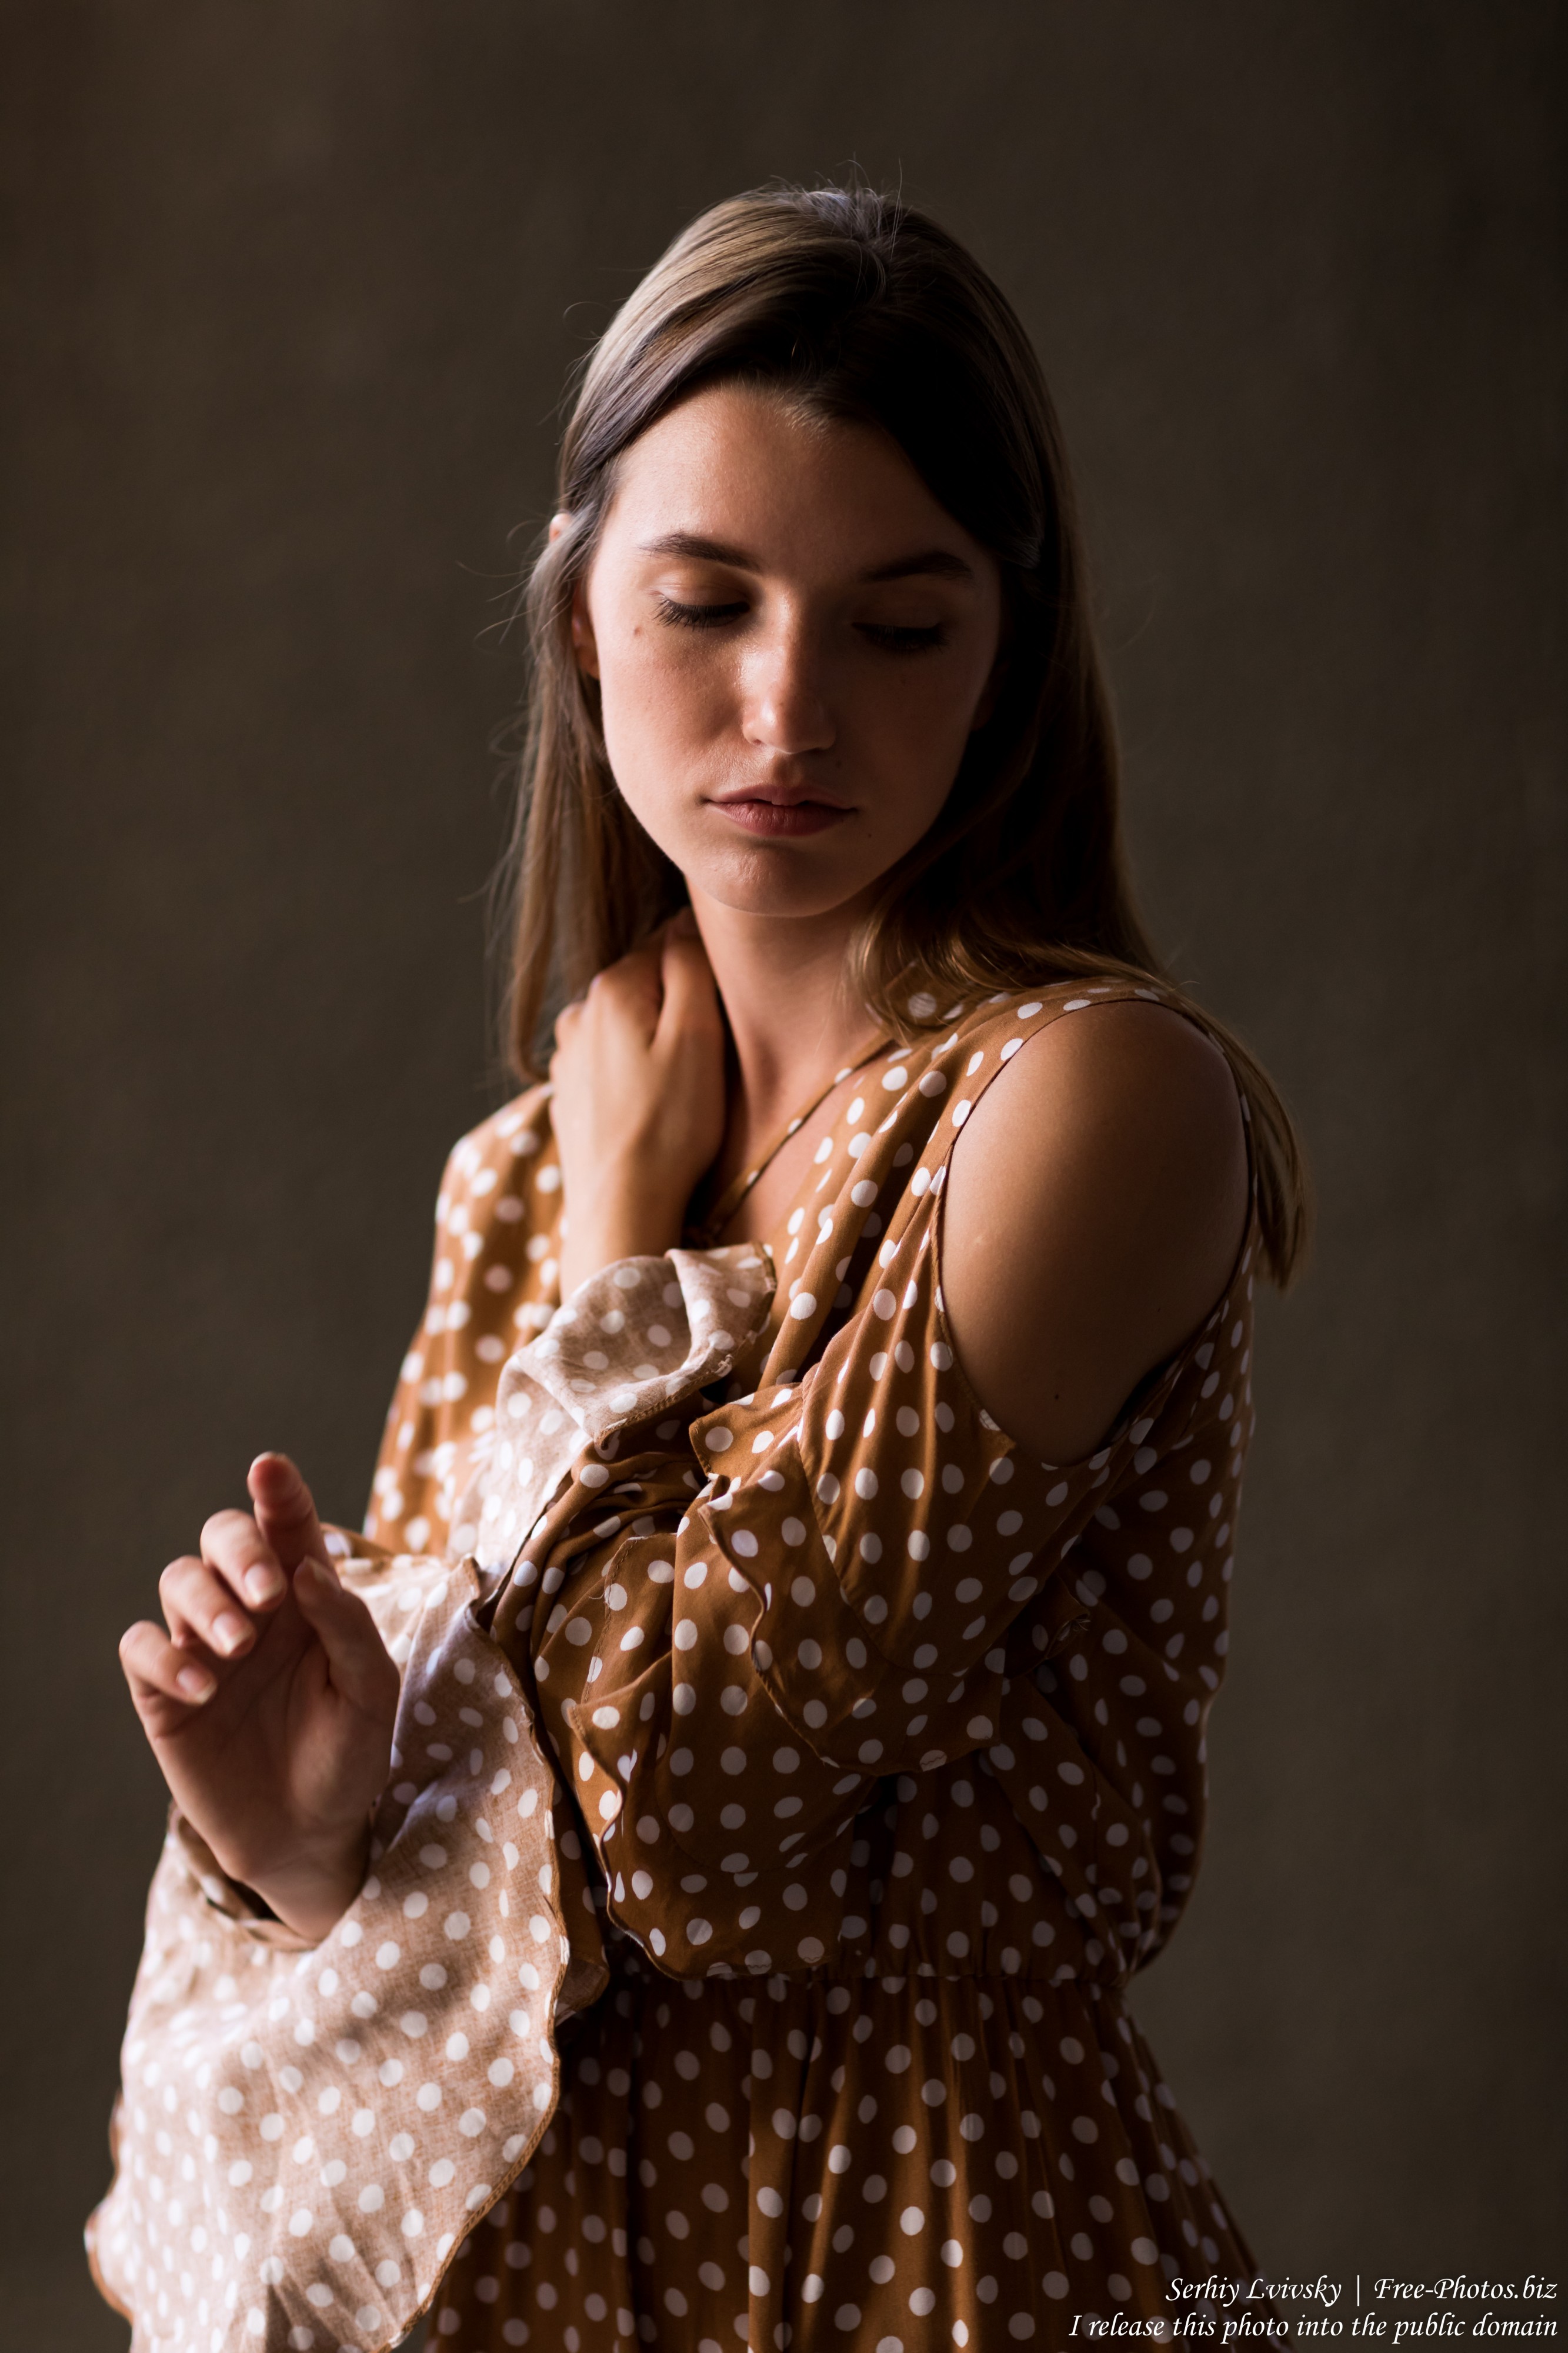 Photo Of Sophia A 21 Year Old Girl Photographed In August 2019 By Serhiy Lvivsky Picture 9